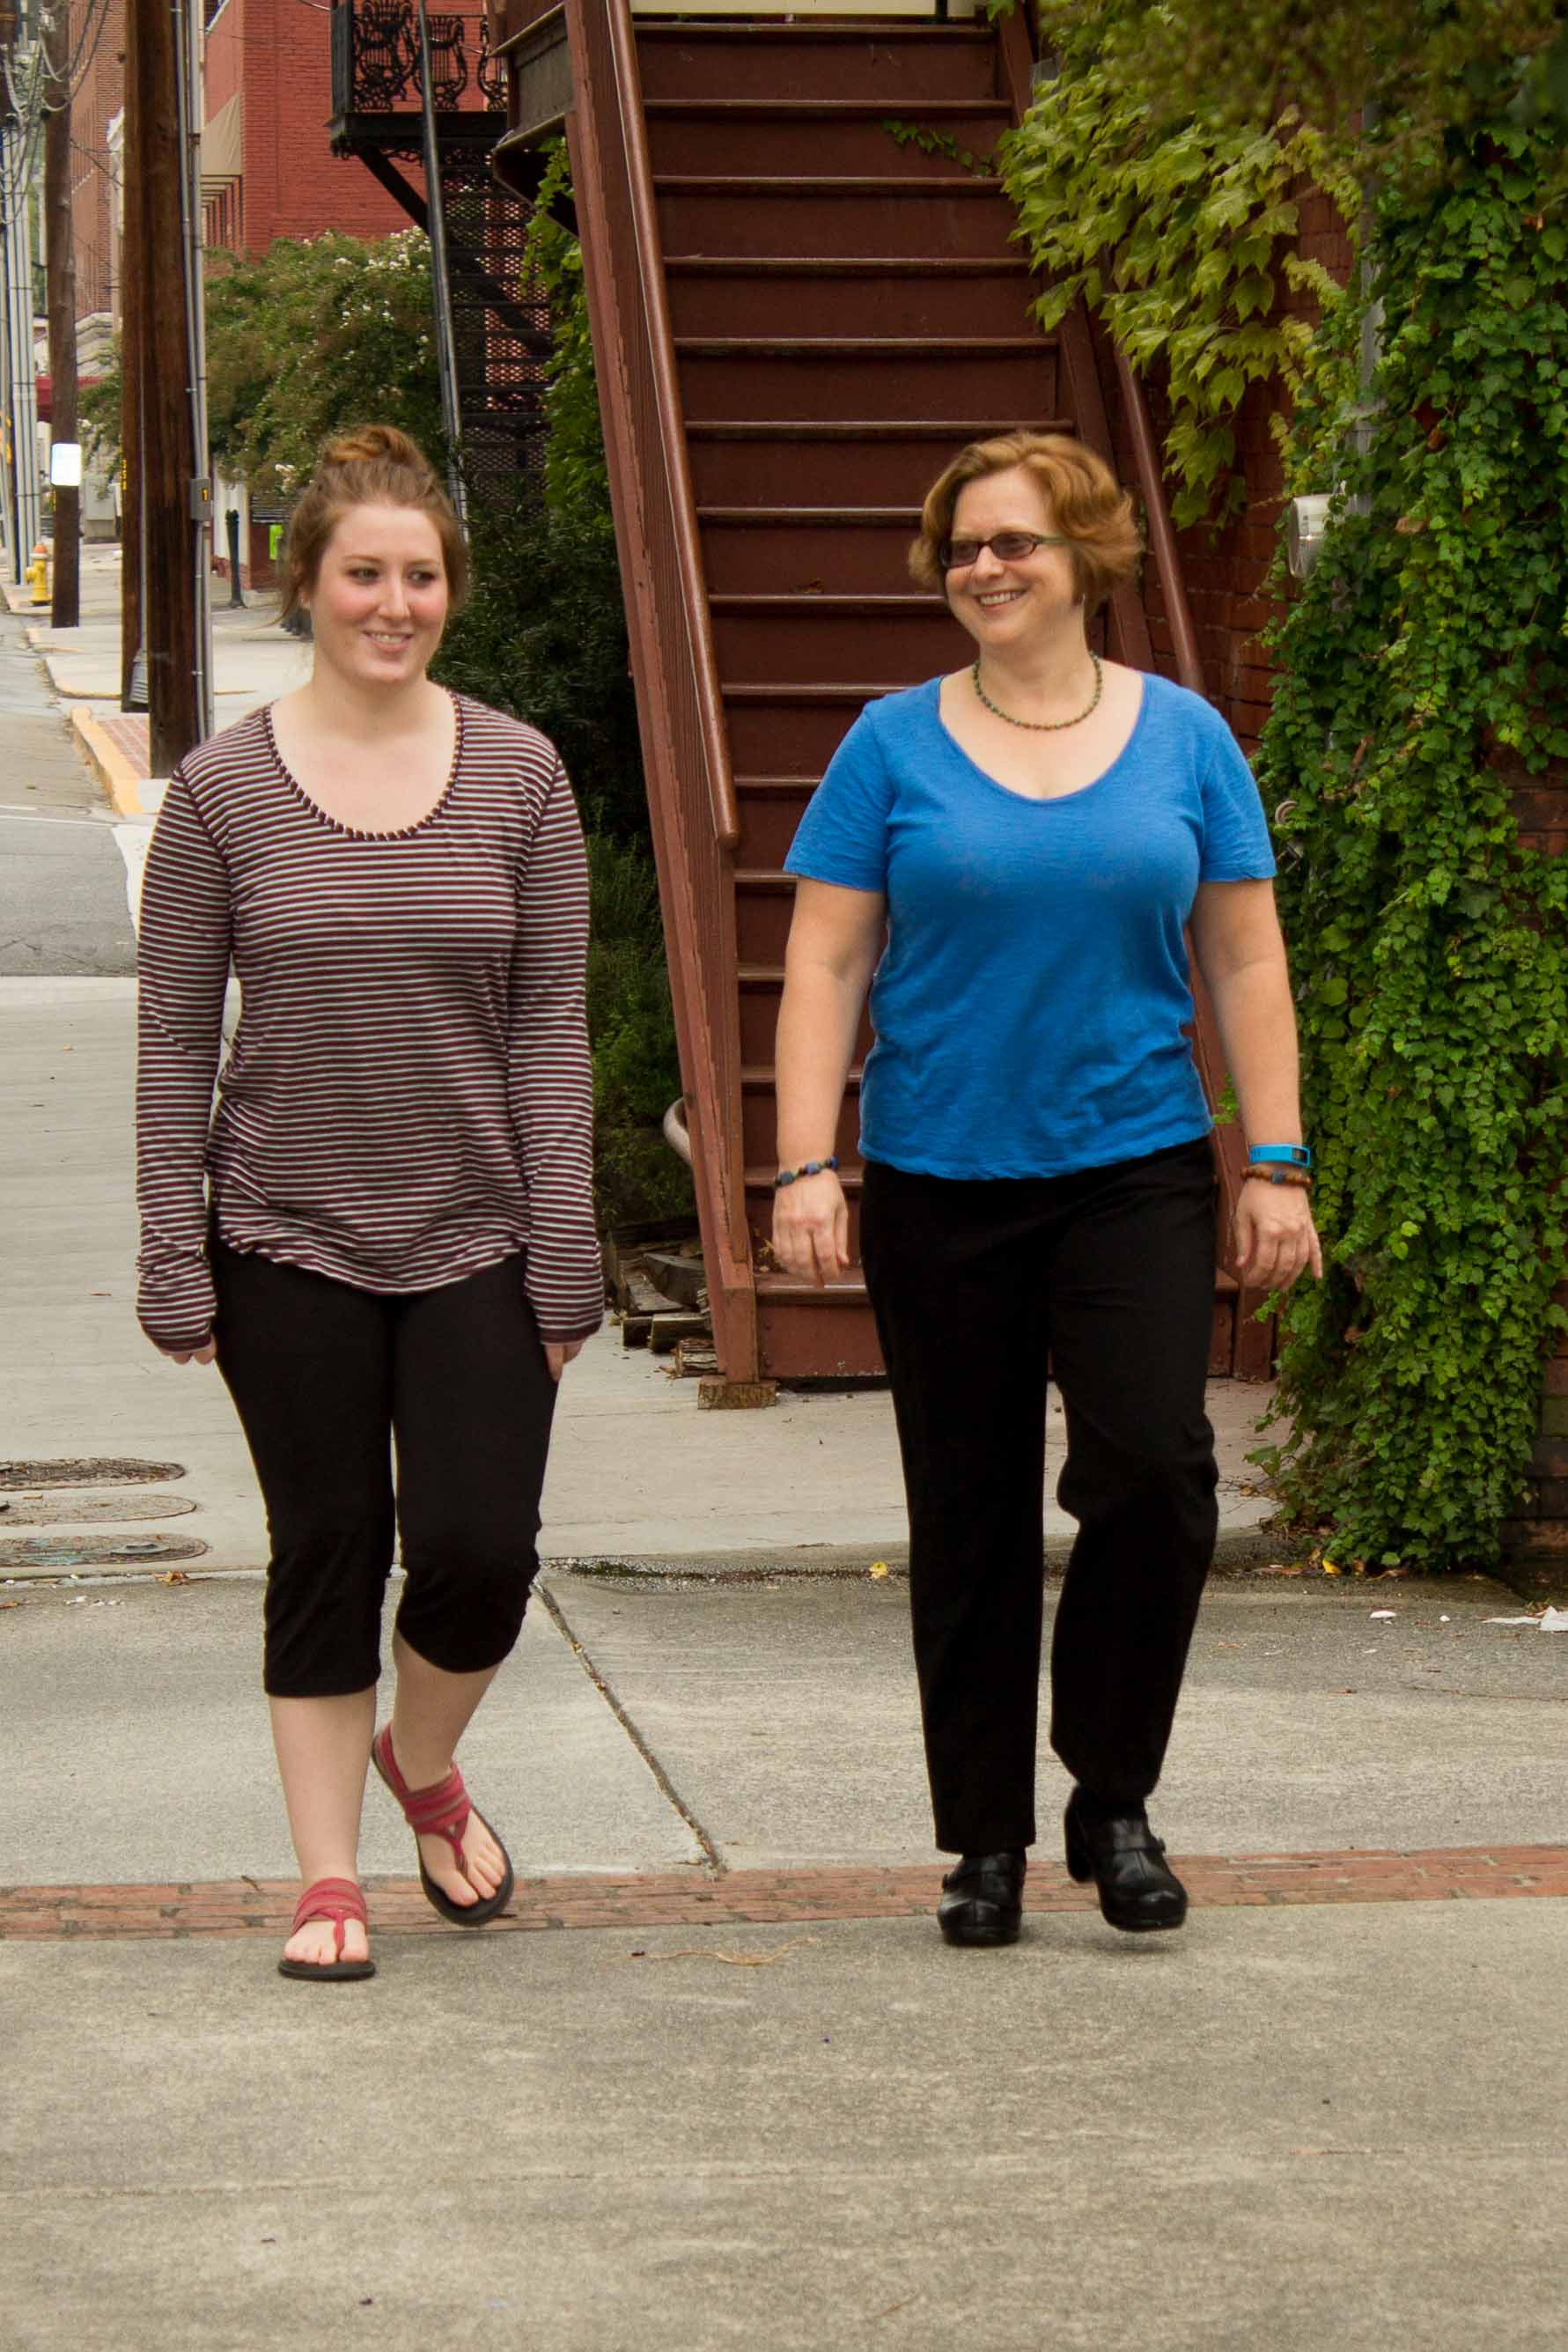 Ellen Thompson and client walking during a counseling session